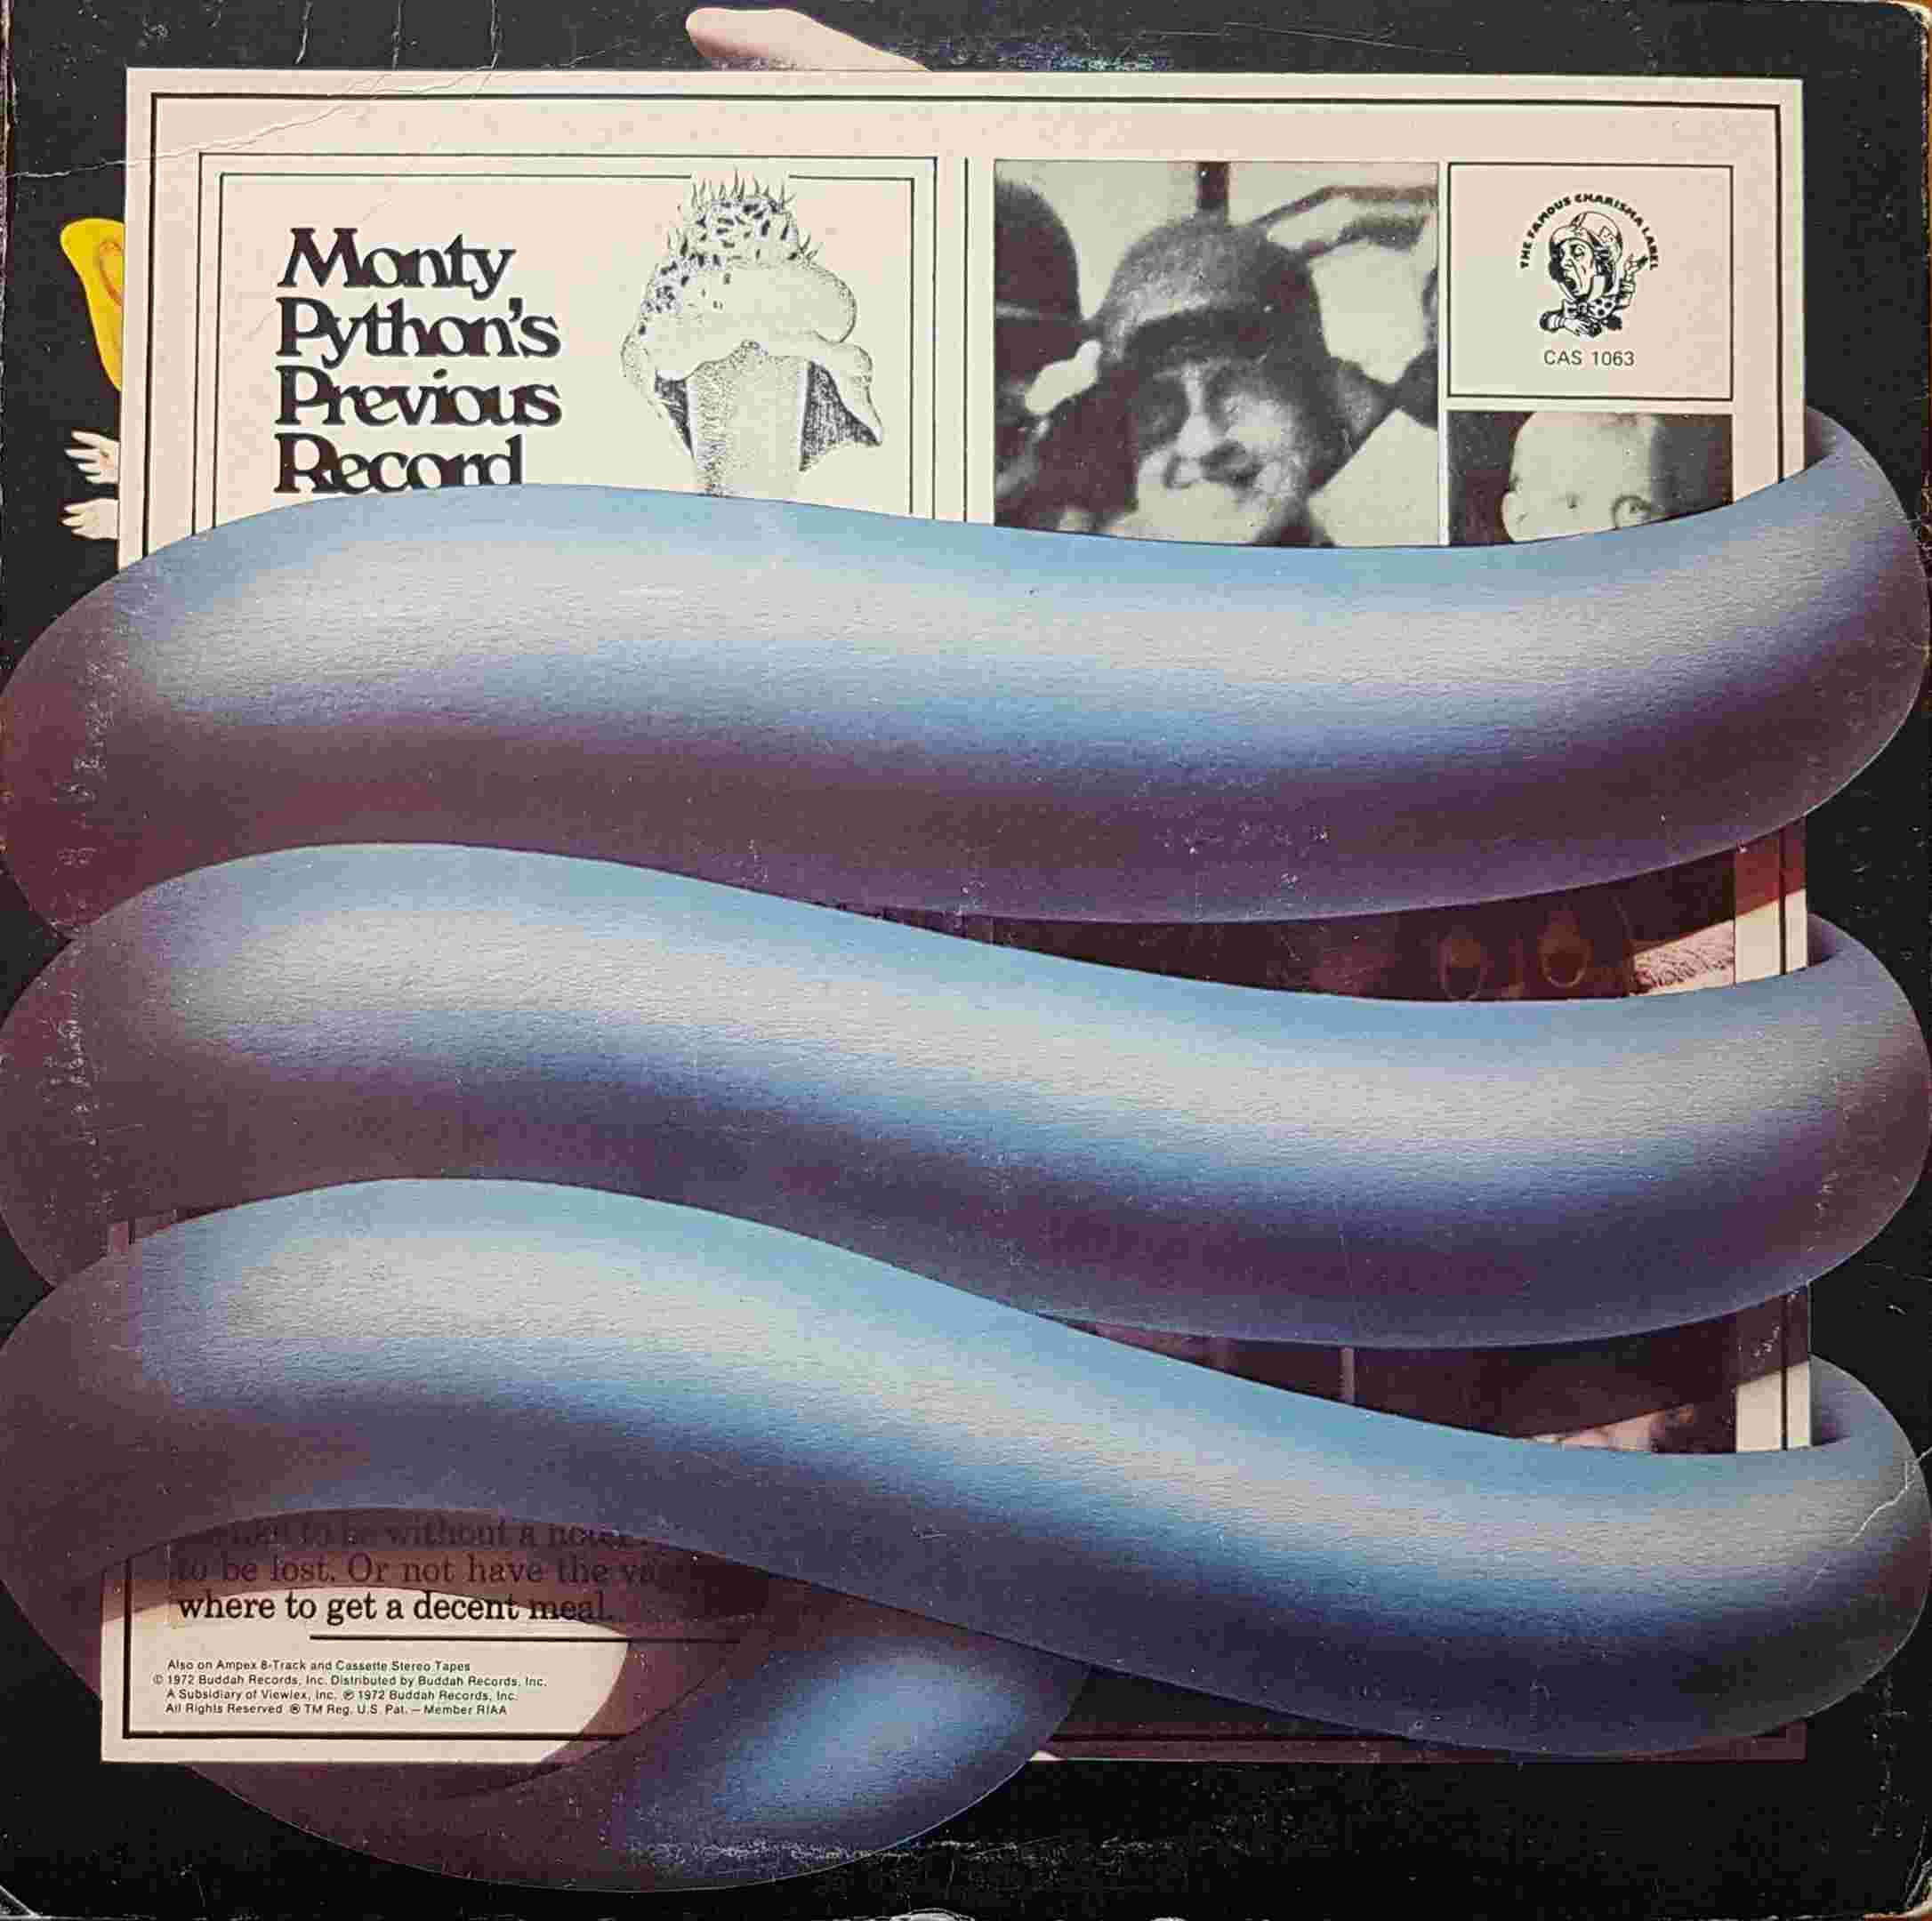 Picture of PYE 12116 Monty Python's previous record by artist Monty Python from the BBC records and Tapes library